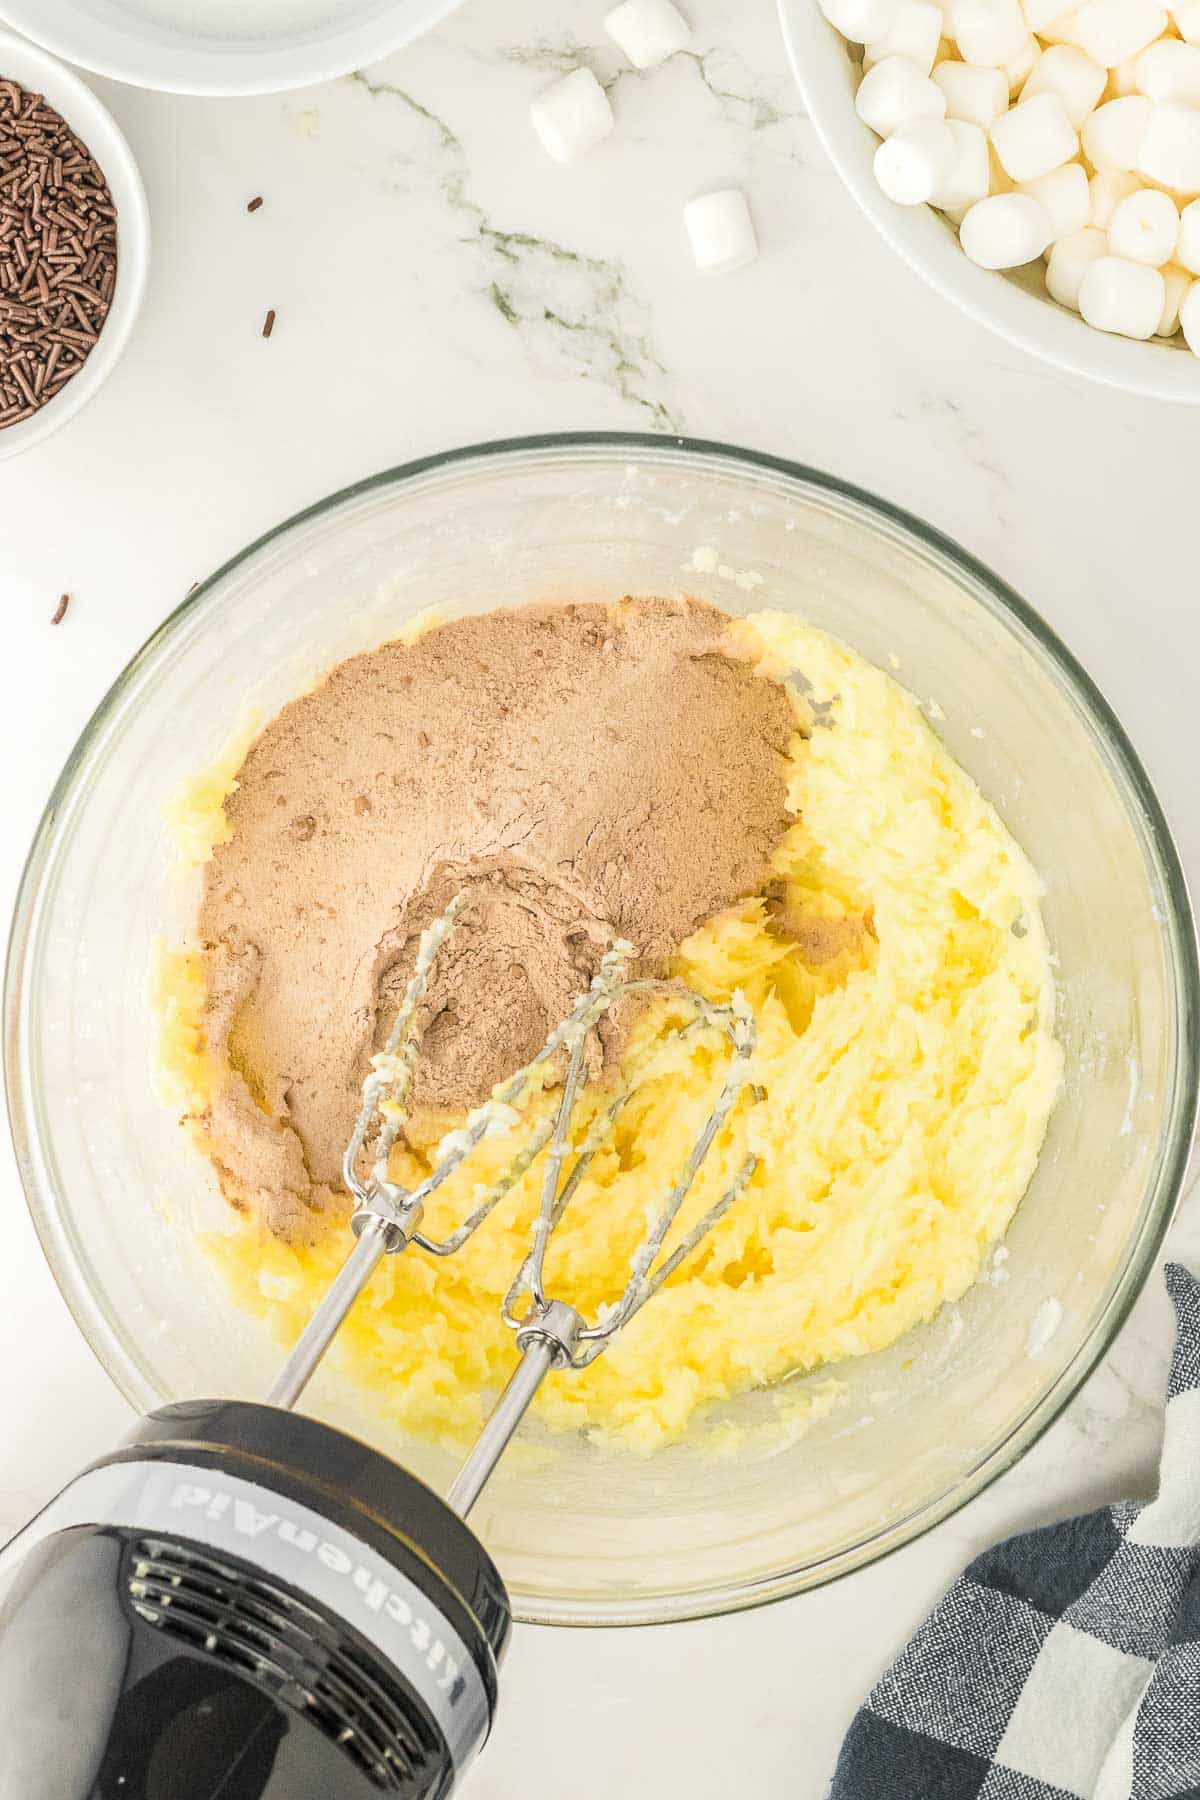 A glass bowl with the butter and chocolate mixture being mixed together with a hand mixer.